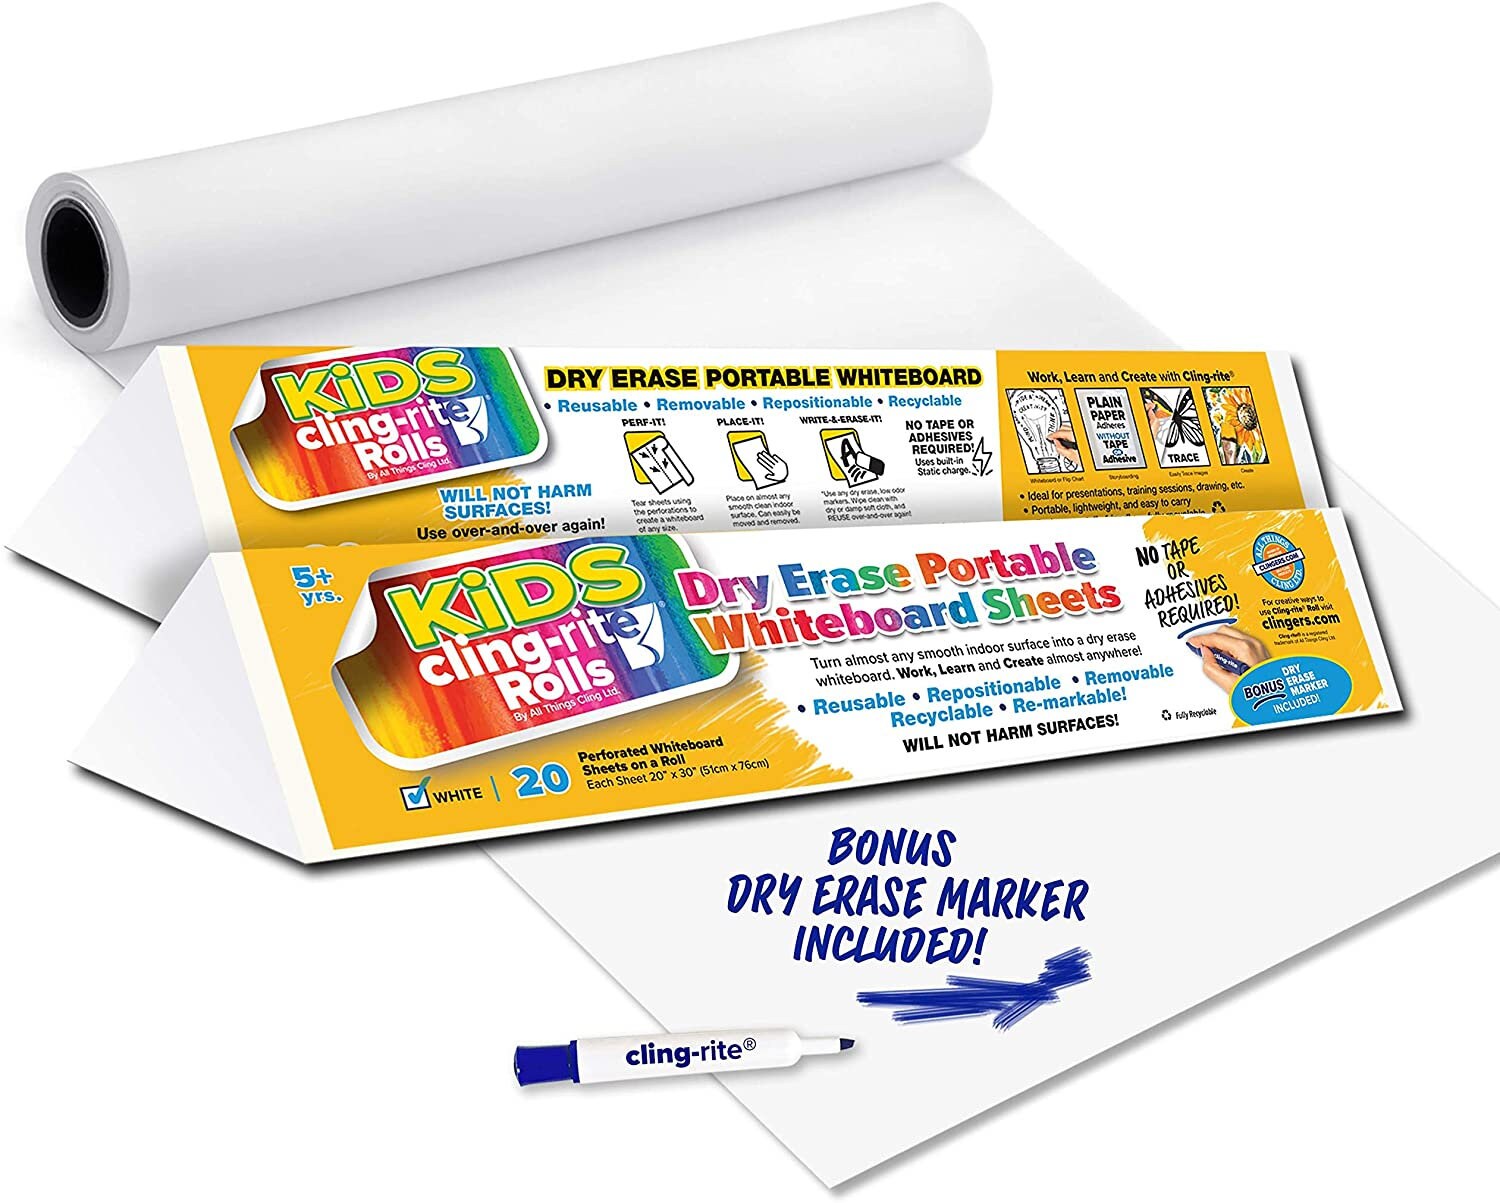 Dry Erase Kids Cling-rite Rolls, Portable Whiteboard, 50' Roll 20 Sheets,  Sheet Size 20x30 for School, Arts & Crafts With Dry Erase Marker 